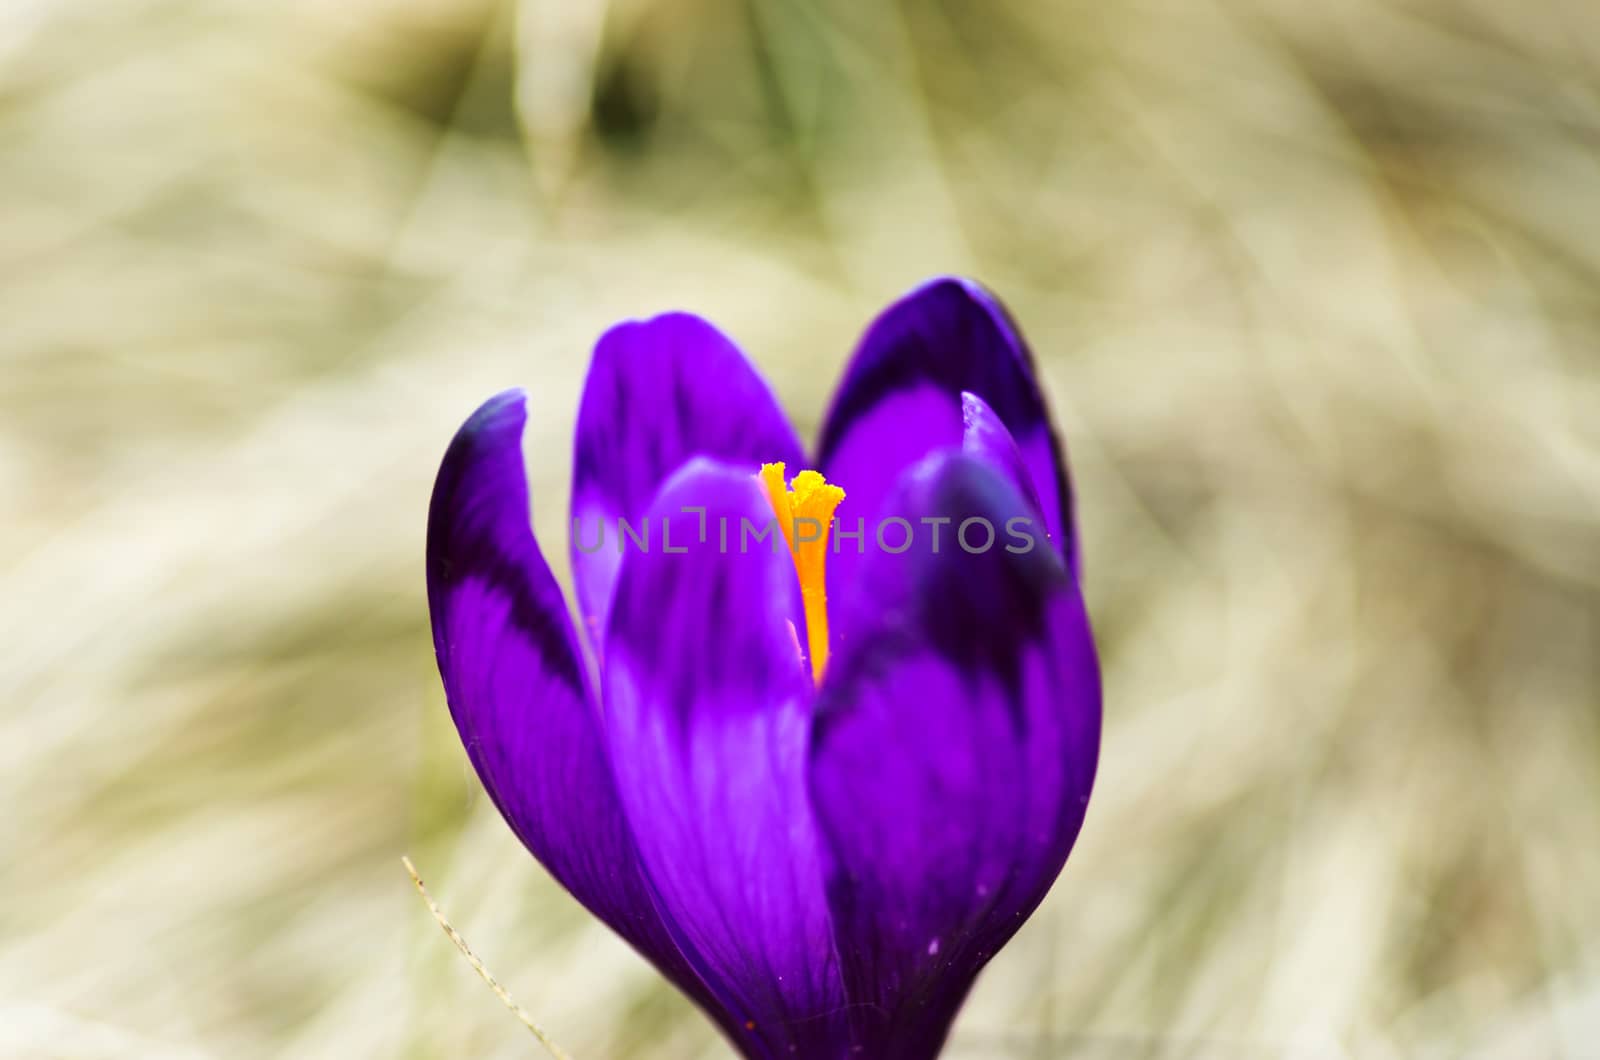 Spring crocus flowers on  natural background. Selective focus